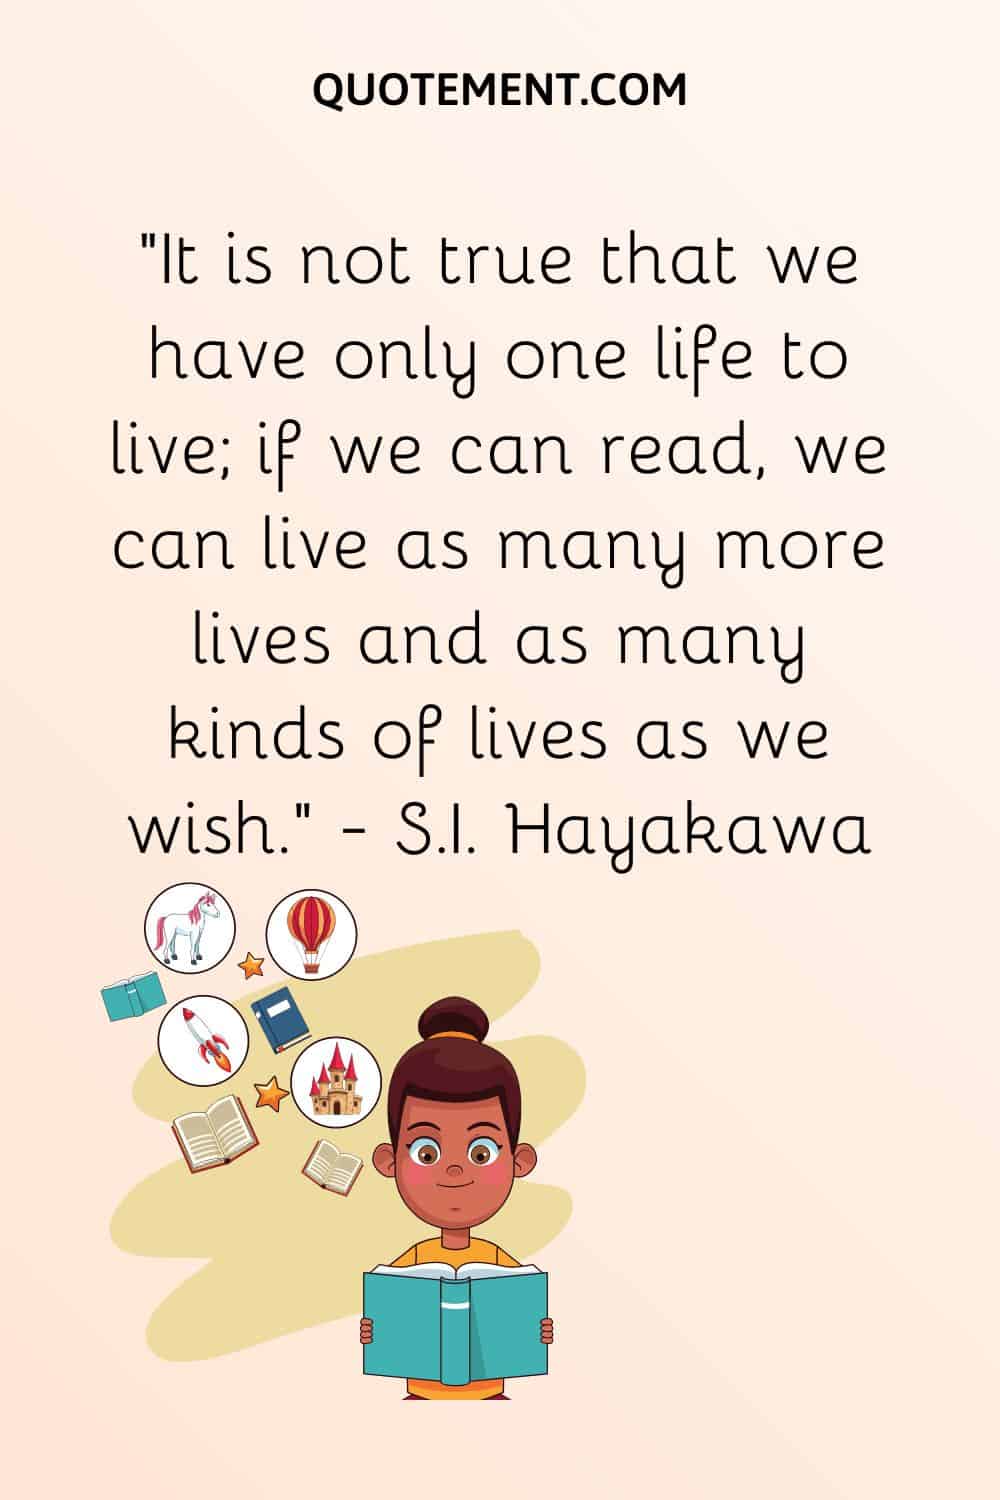 “It is not true that we have only one life to live; if we can read, we can live as many more lives and as many kinds of lives as we wish.” — S.I. Hayakawa